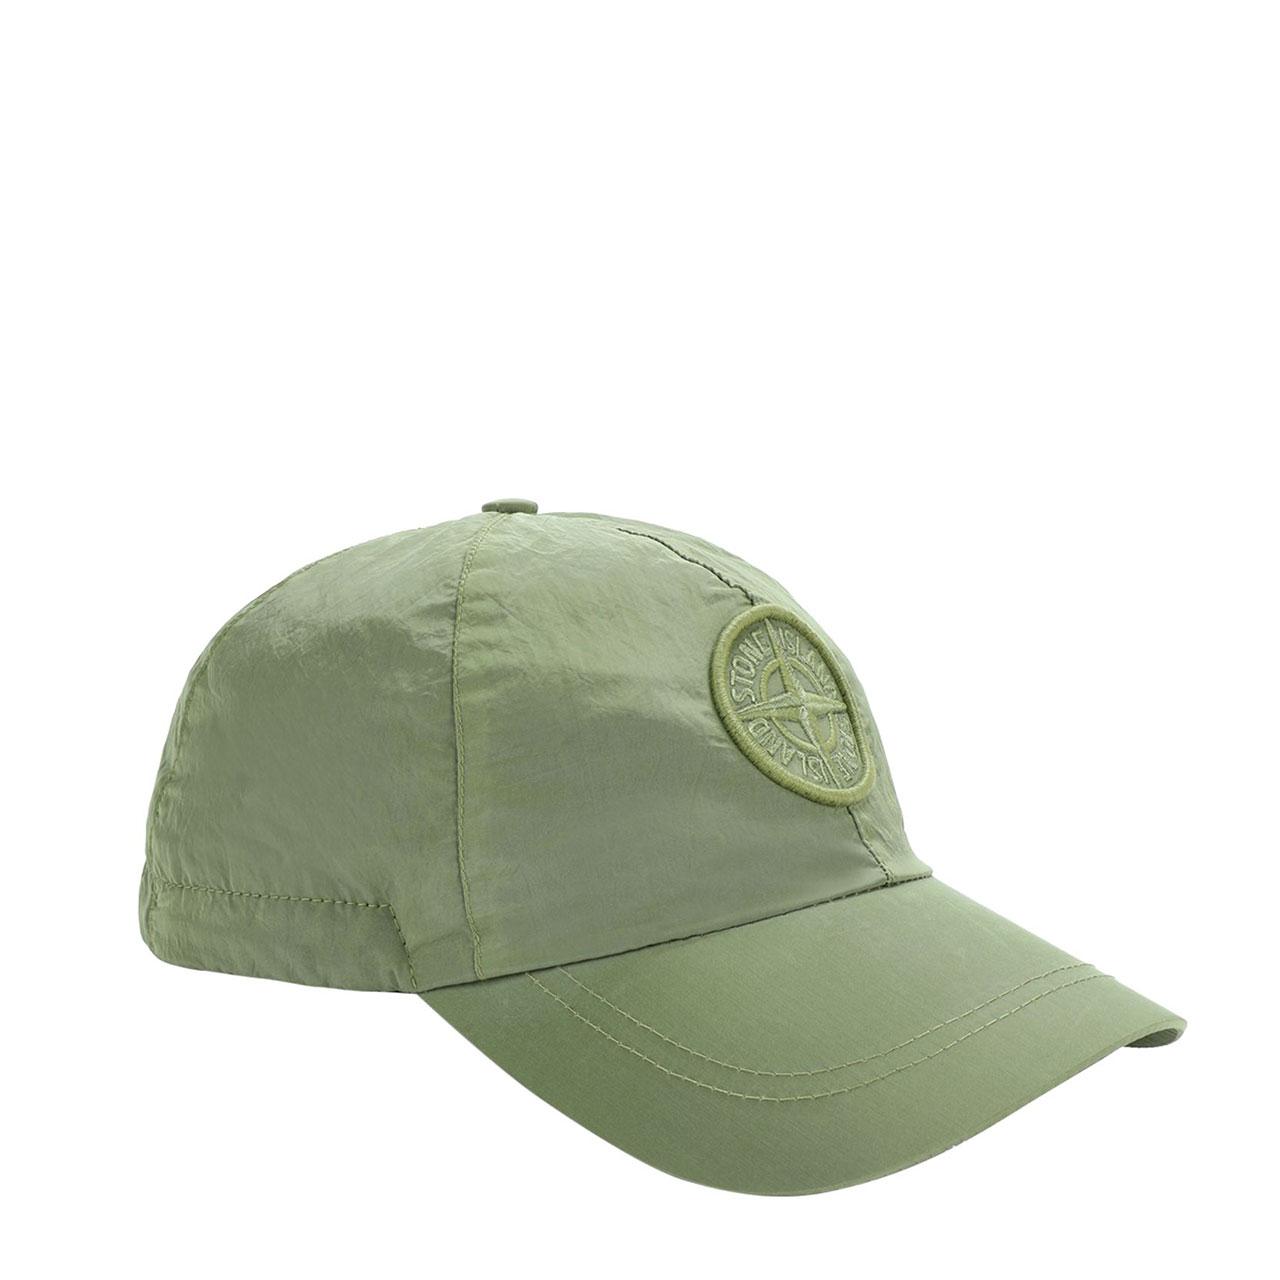 Stone Island Synthetic Nylon Metal Cap in Olive (Green) for Men - Lyst